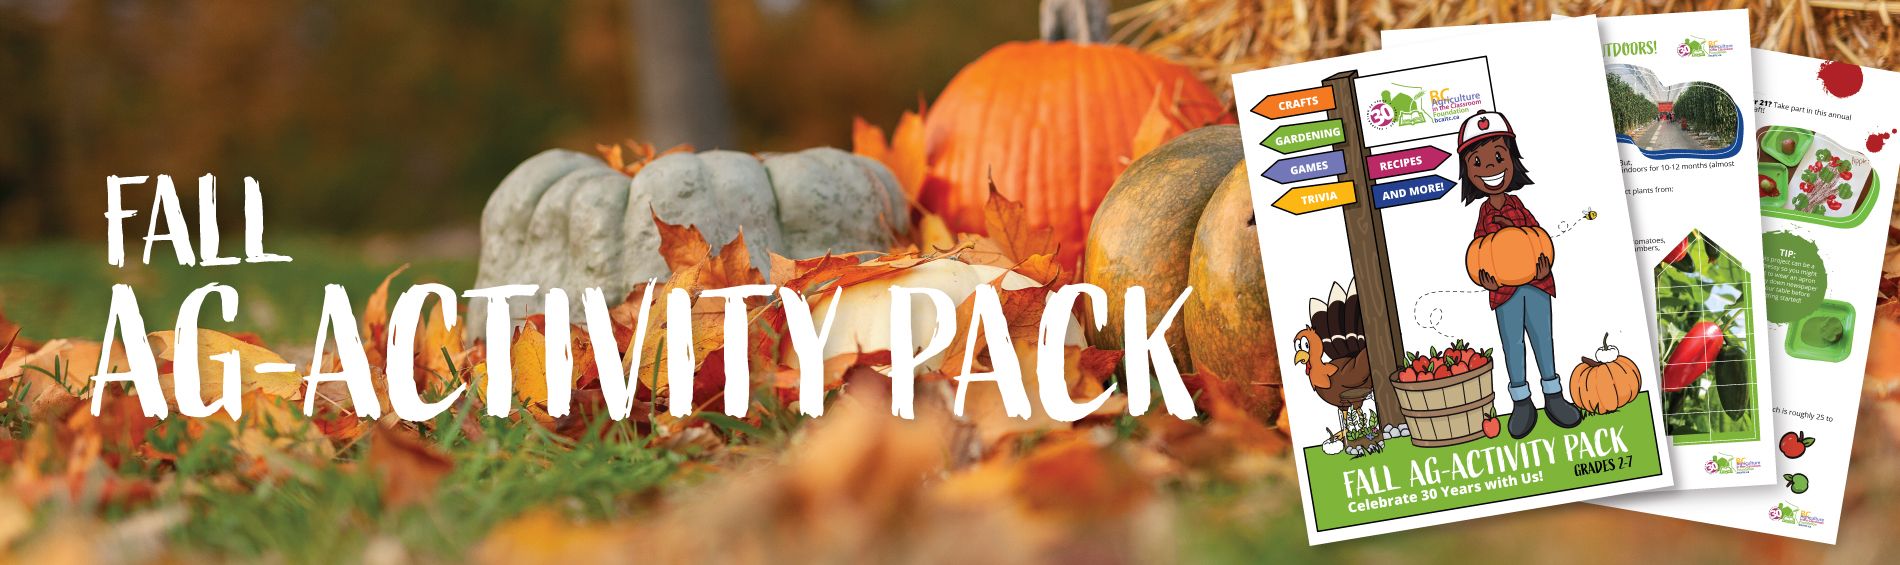 Fall Ag-Activity Pack